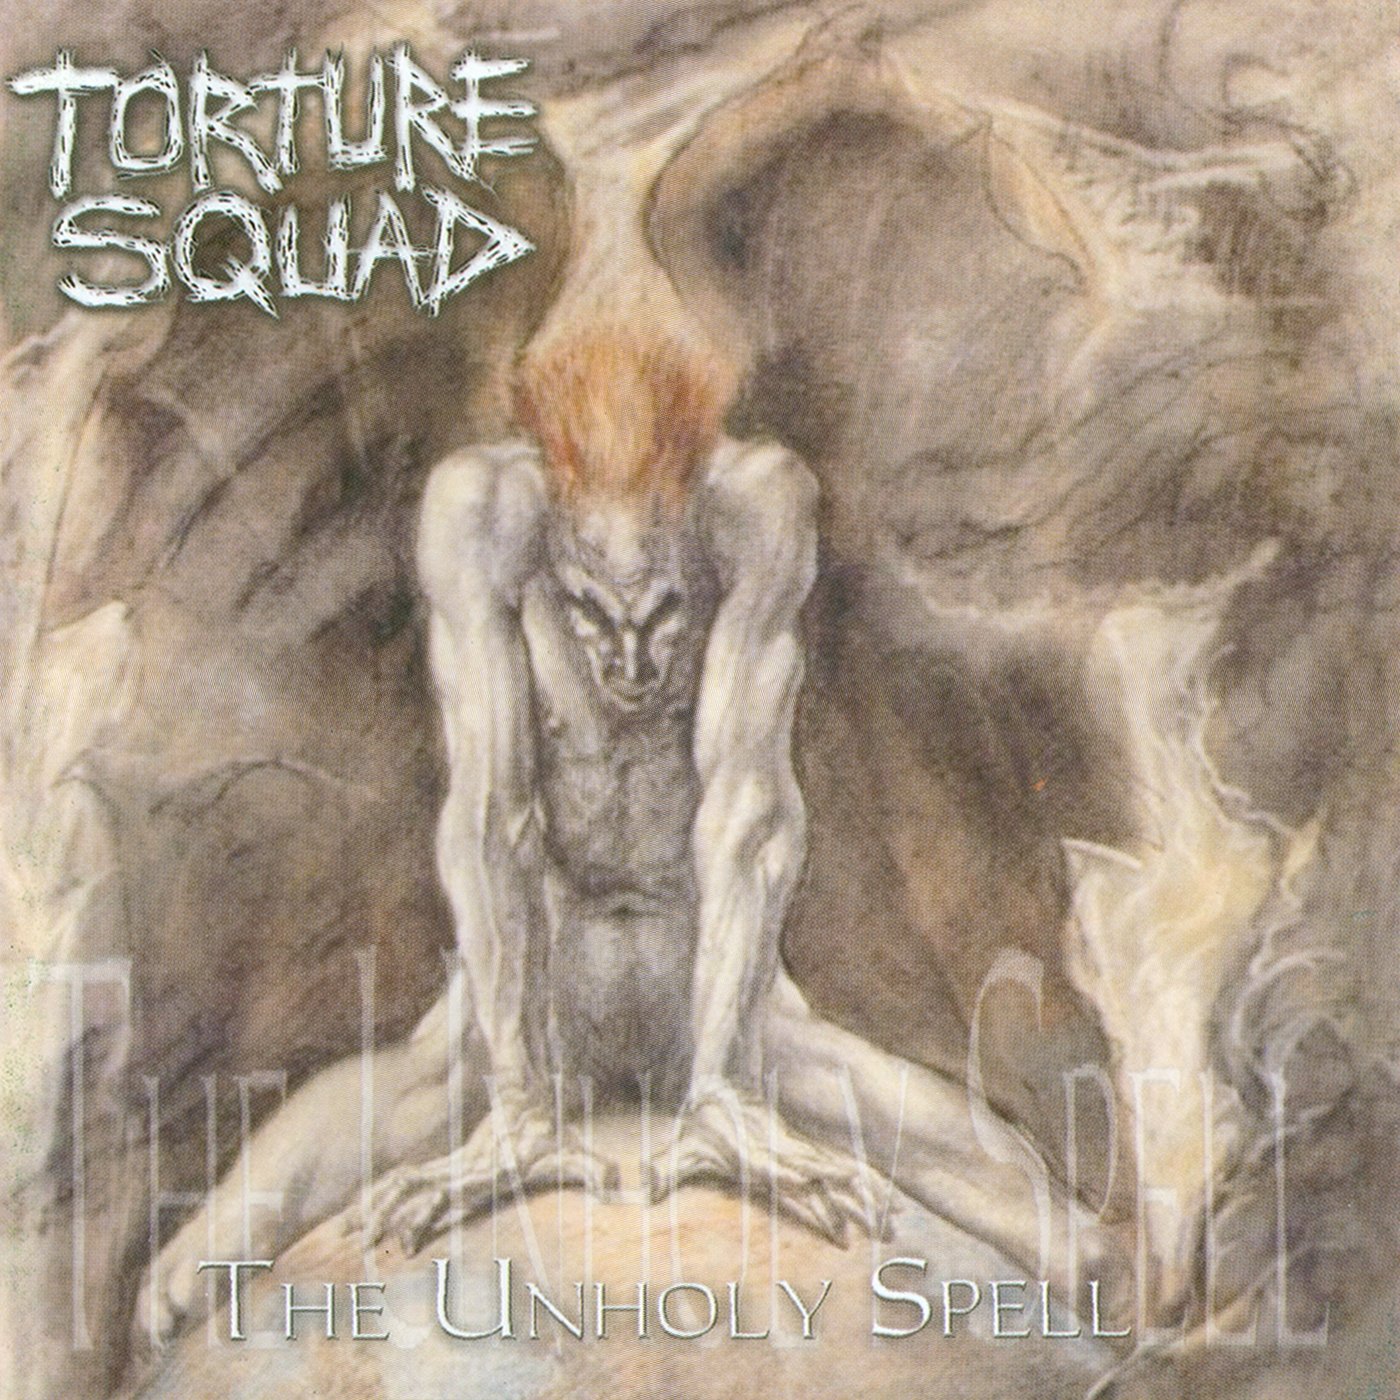 Torture Squad - The Unholy Spell (2021) FLAC Download